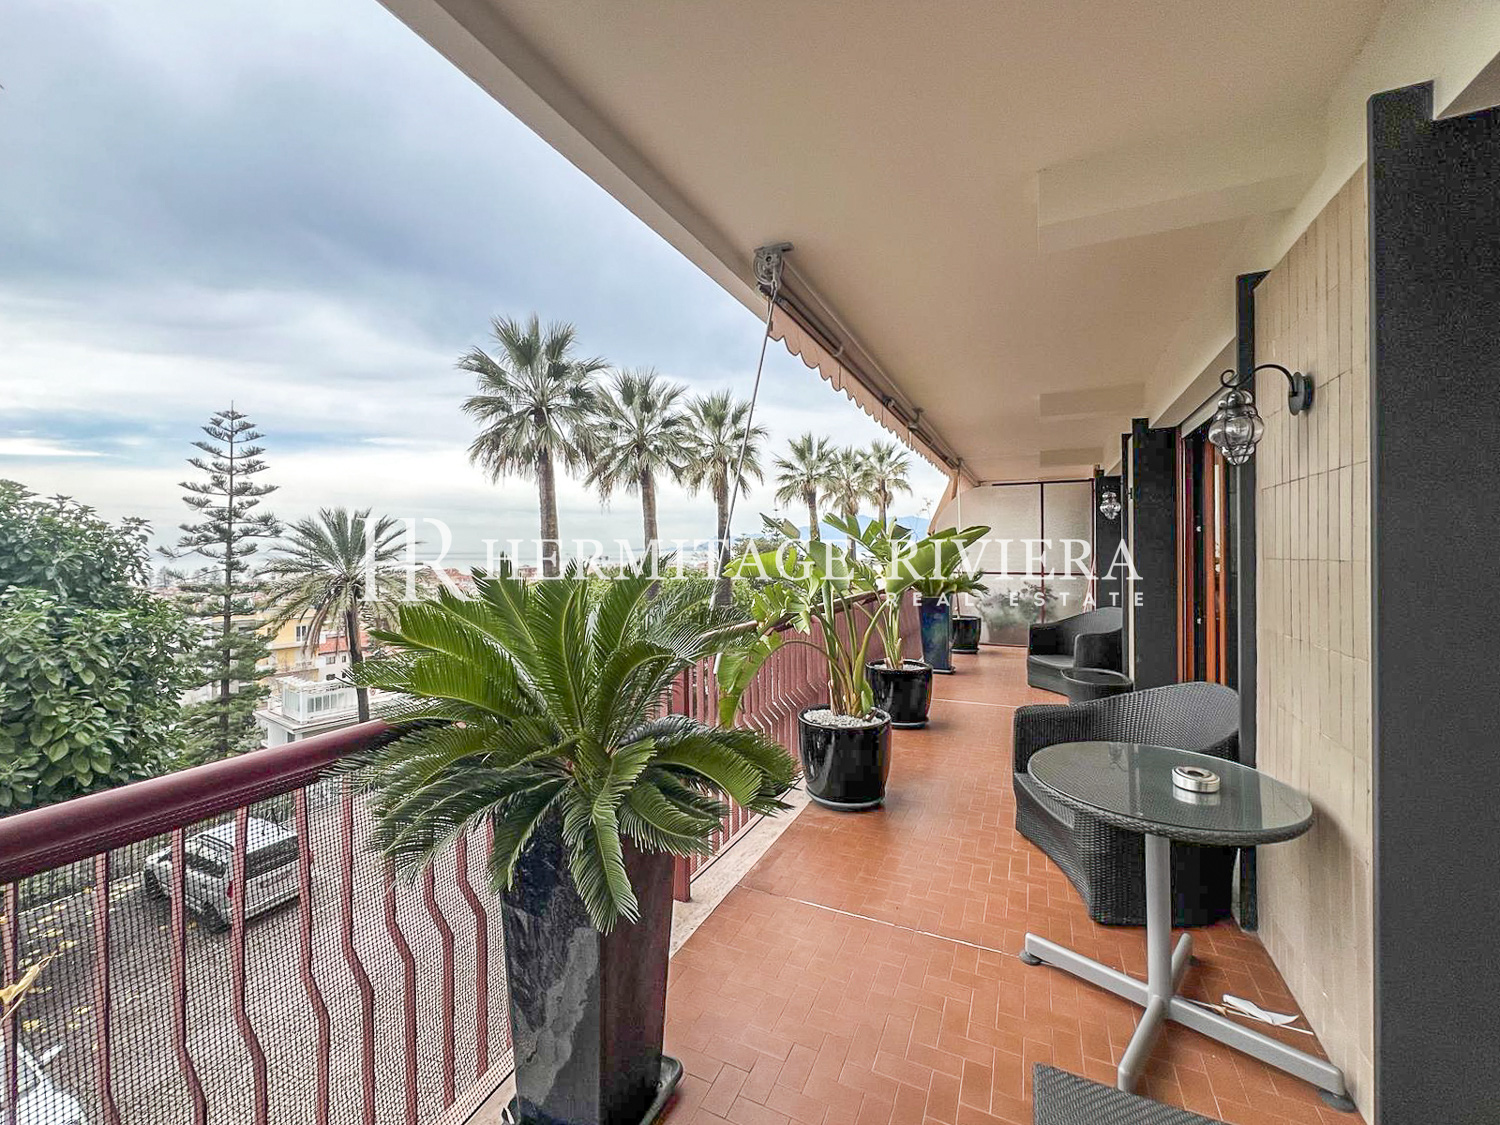 Splendid renovated apartment with terrace and sea view  (image 1)